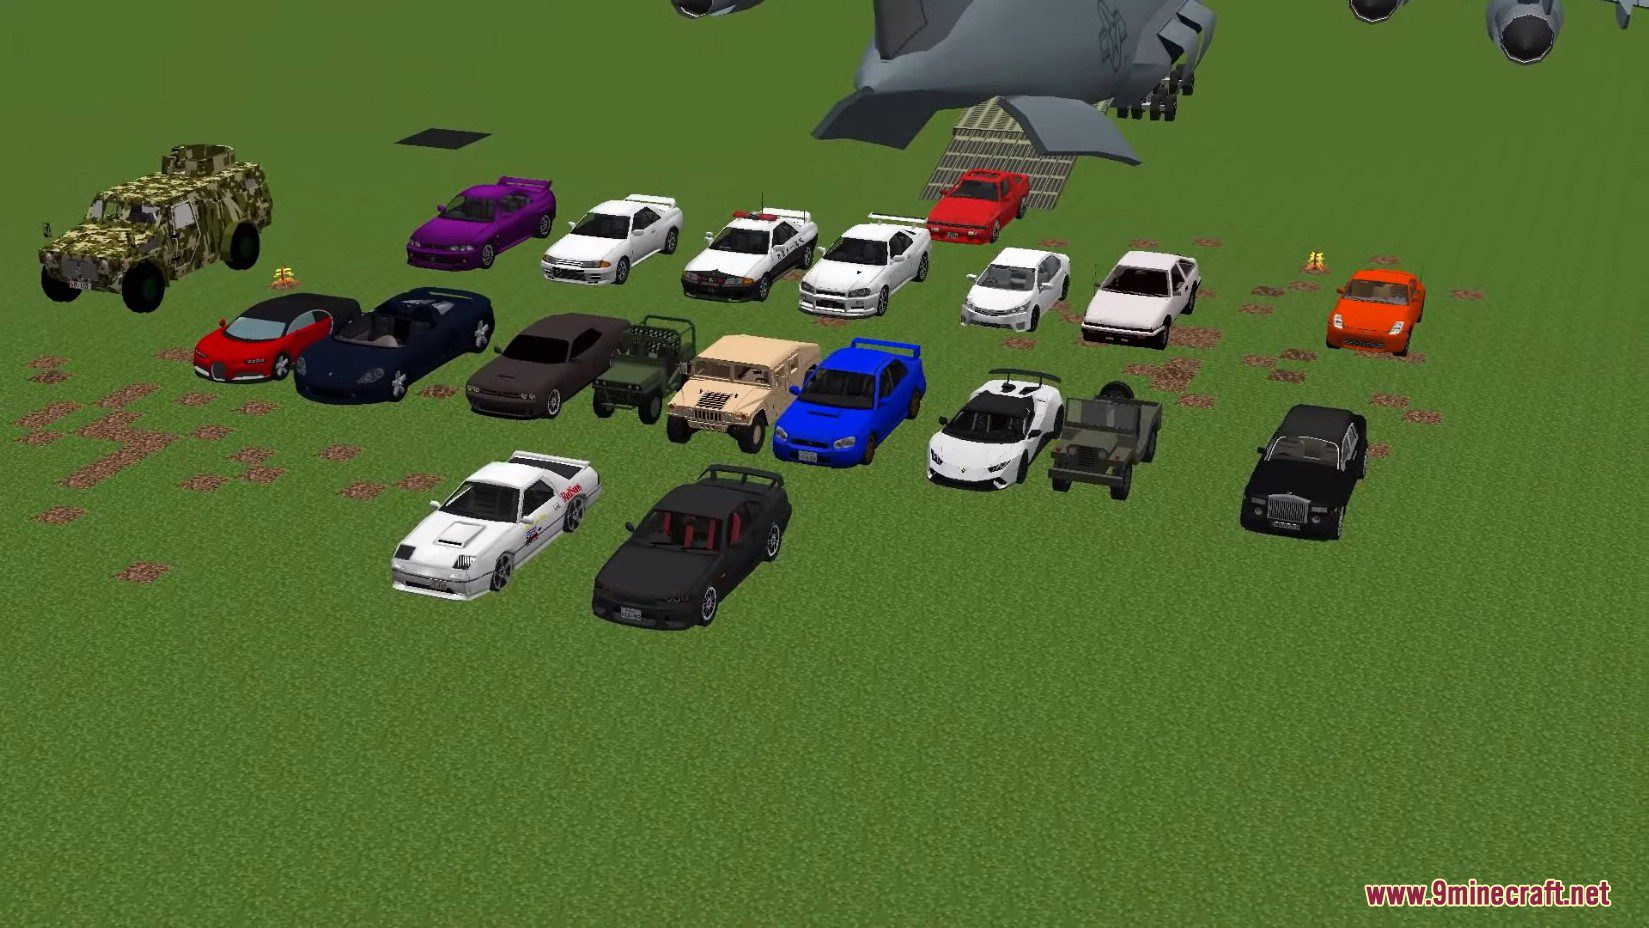 Mcheli Overdrive Mod (1.7.10) - Largest Cars and Planes Mod 2